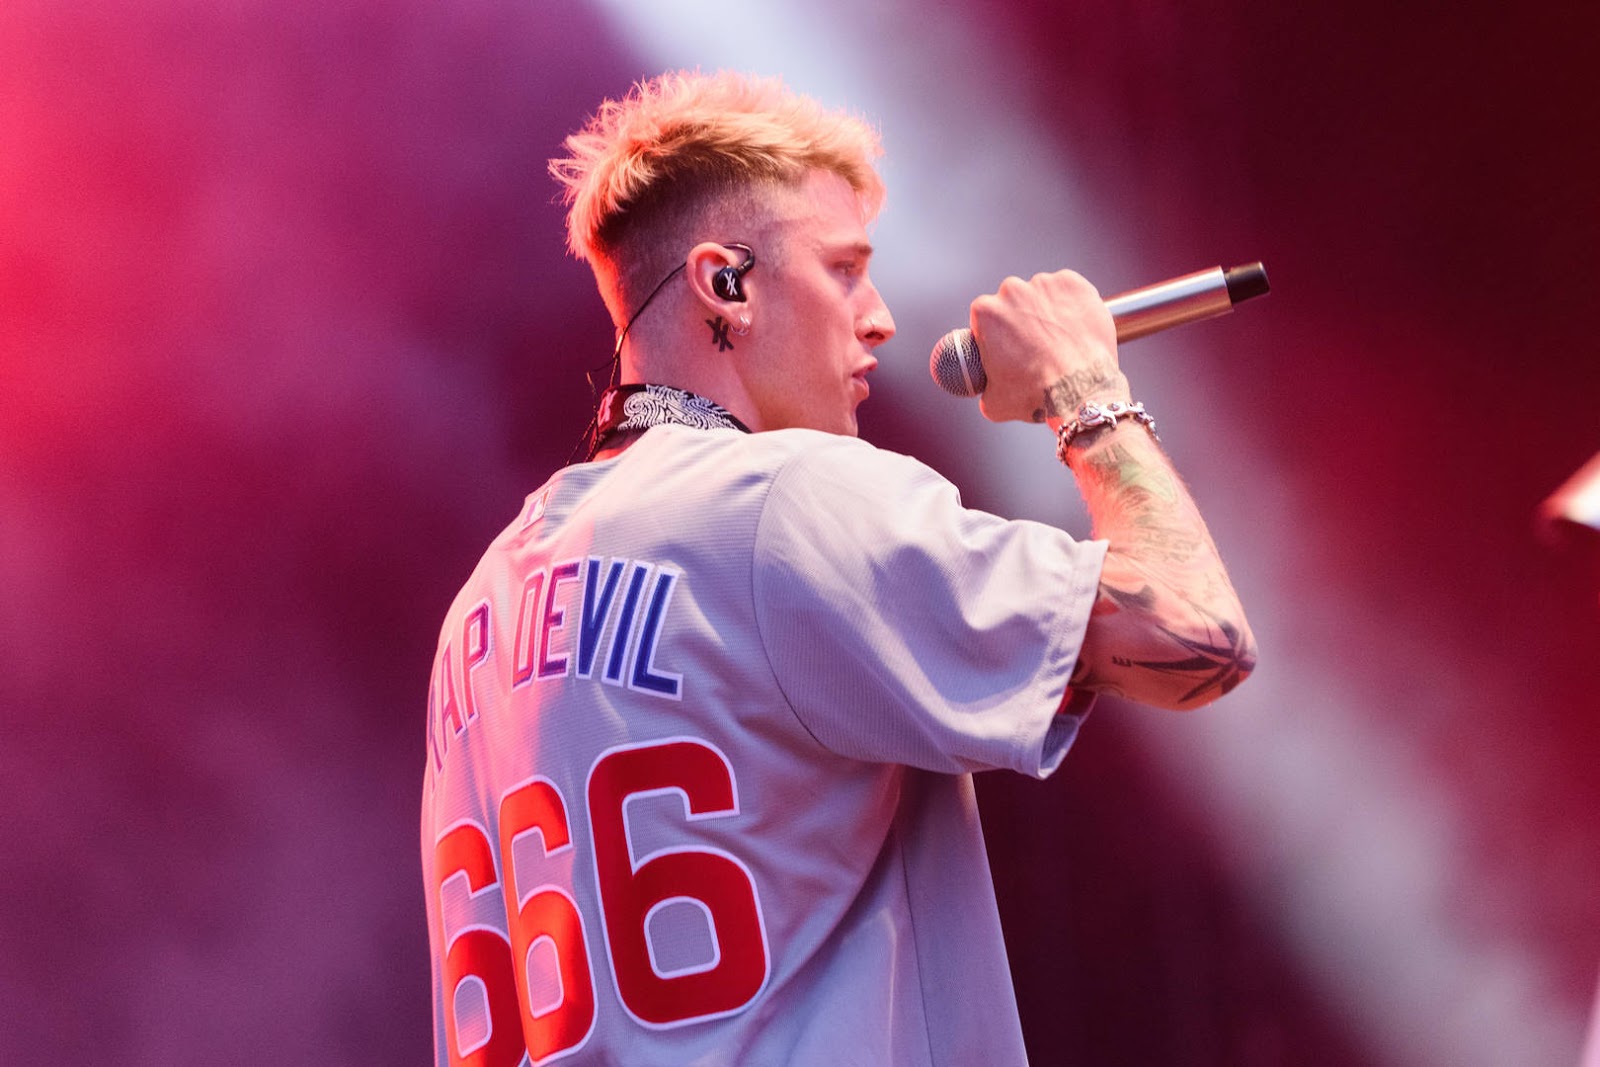 MGK Working On 2020 Album ? Shares New Song "Why Are You Here"